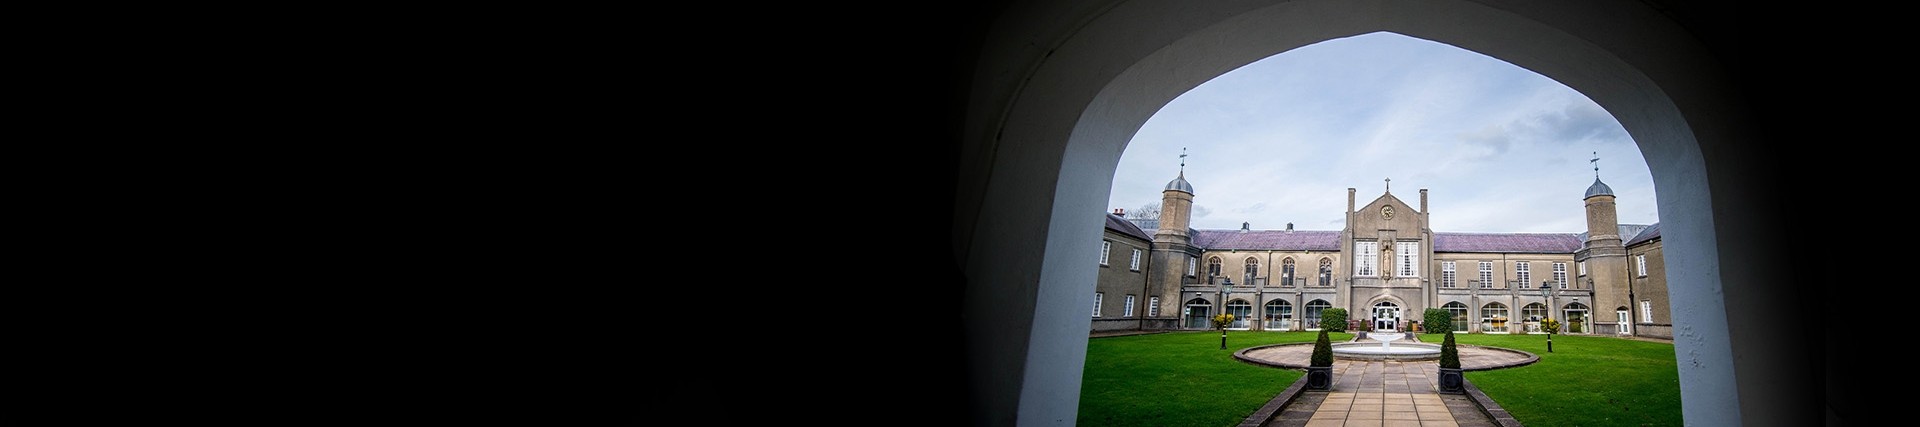 View of the Lampeter old building through an archway